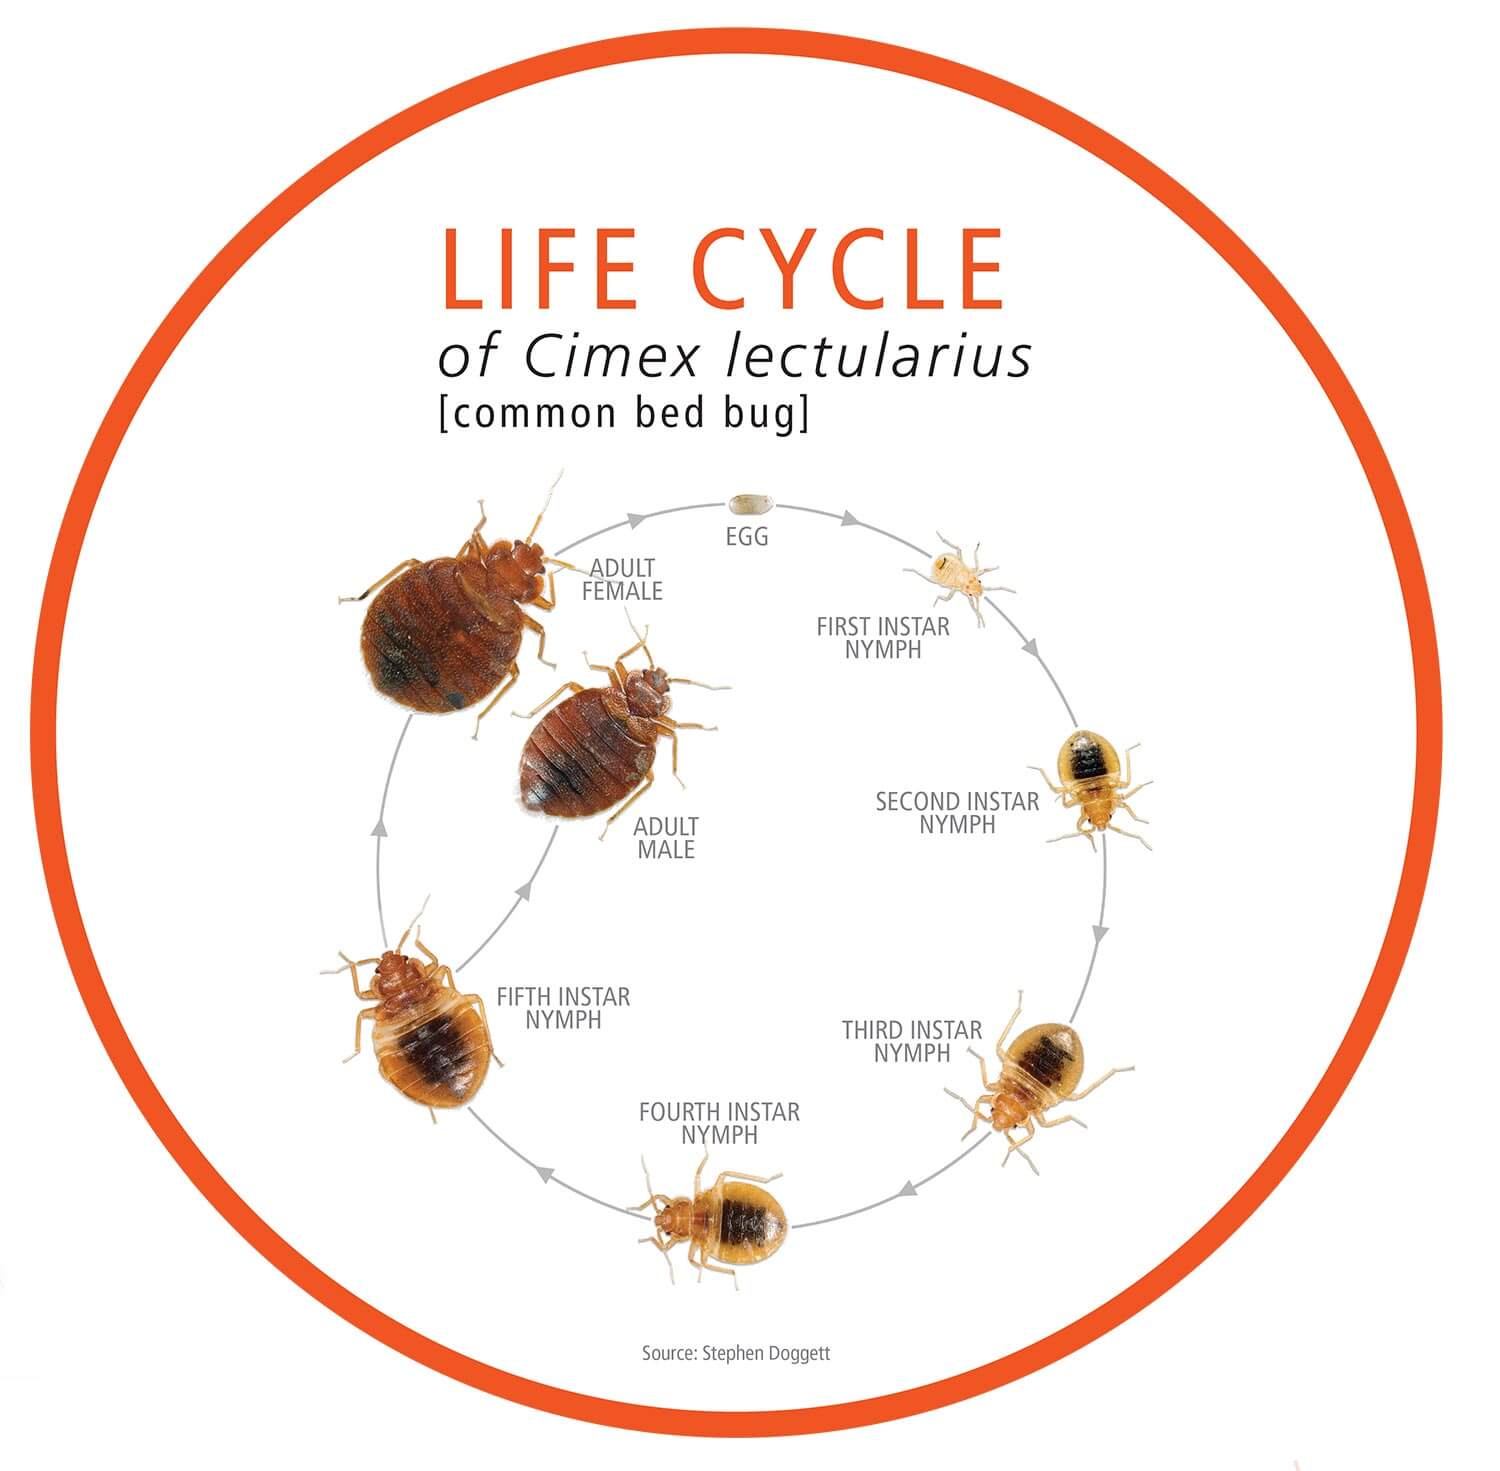 Life cycle graphic of Cimex lectularius (common bed bug): Egg → First Instar Nymph → Second Instar Nymph → Third Instar Nymph → Fourth Instar Nymph → Fifth Instar Nymph → Adult Female or Adult Male